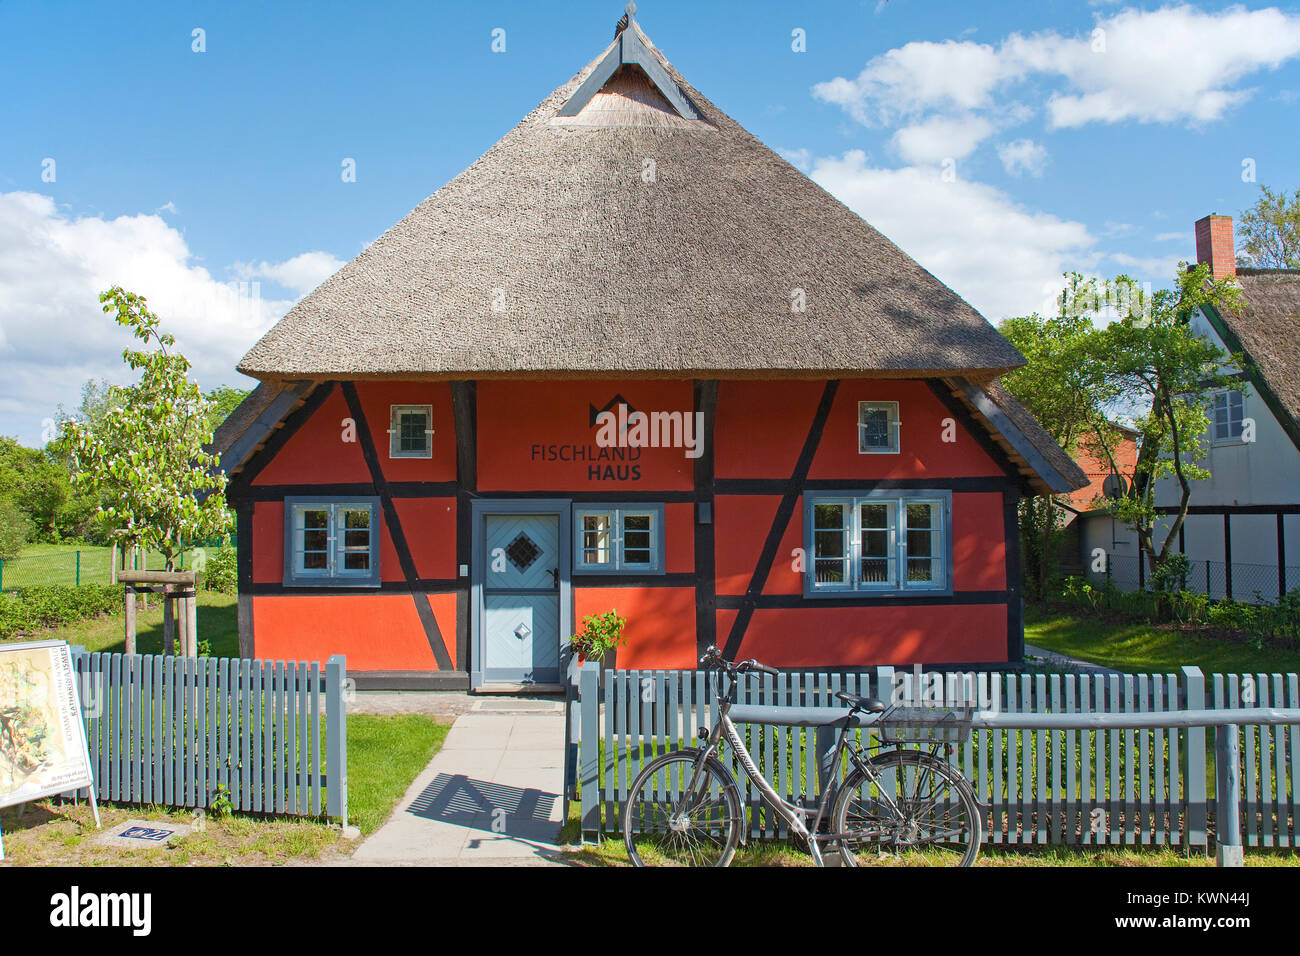 Fishland house, half-timbered and thatched-roof house at Wustrow, landmarked, listed, Fishland, Mecklenburg-Western Pomerania, Baltic sea, Germany Stock Photo